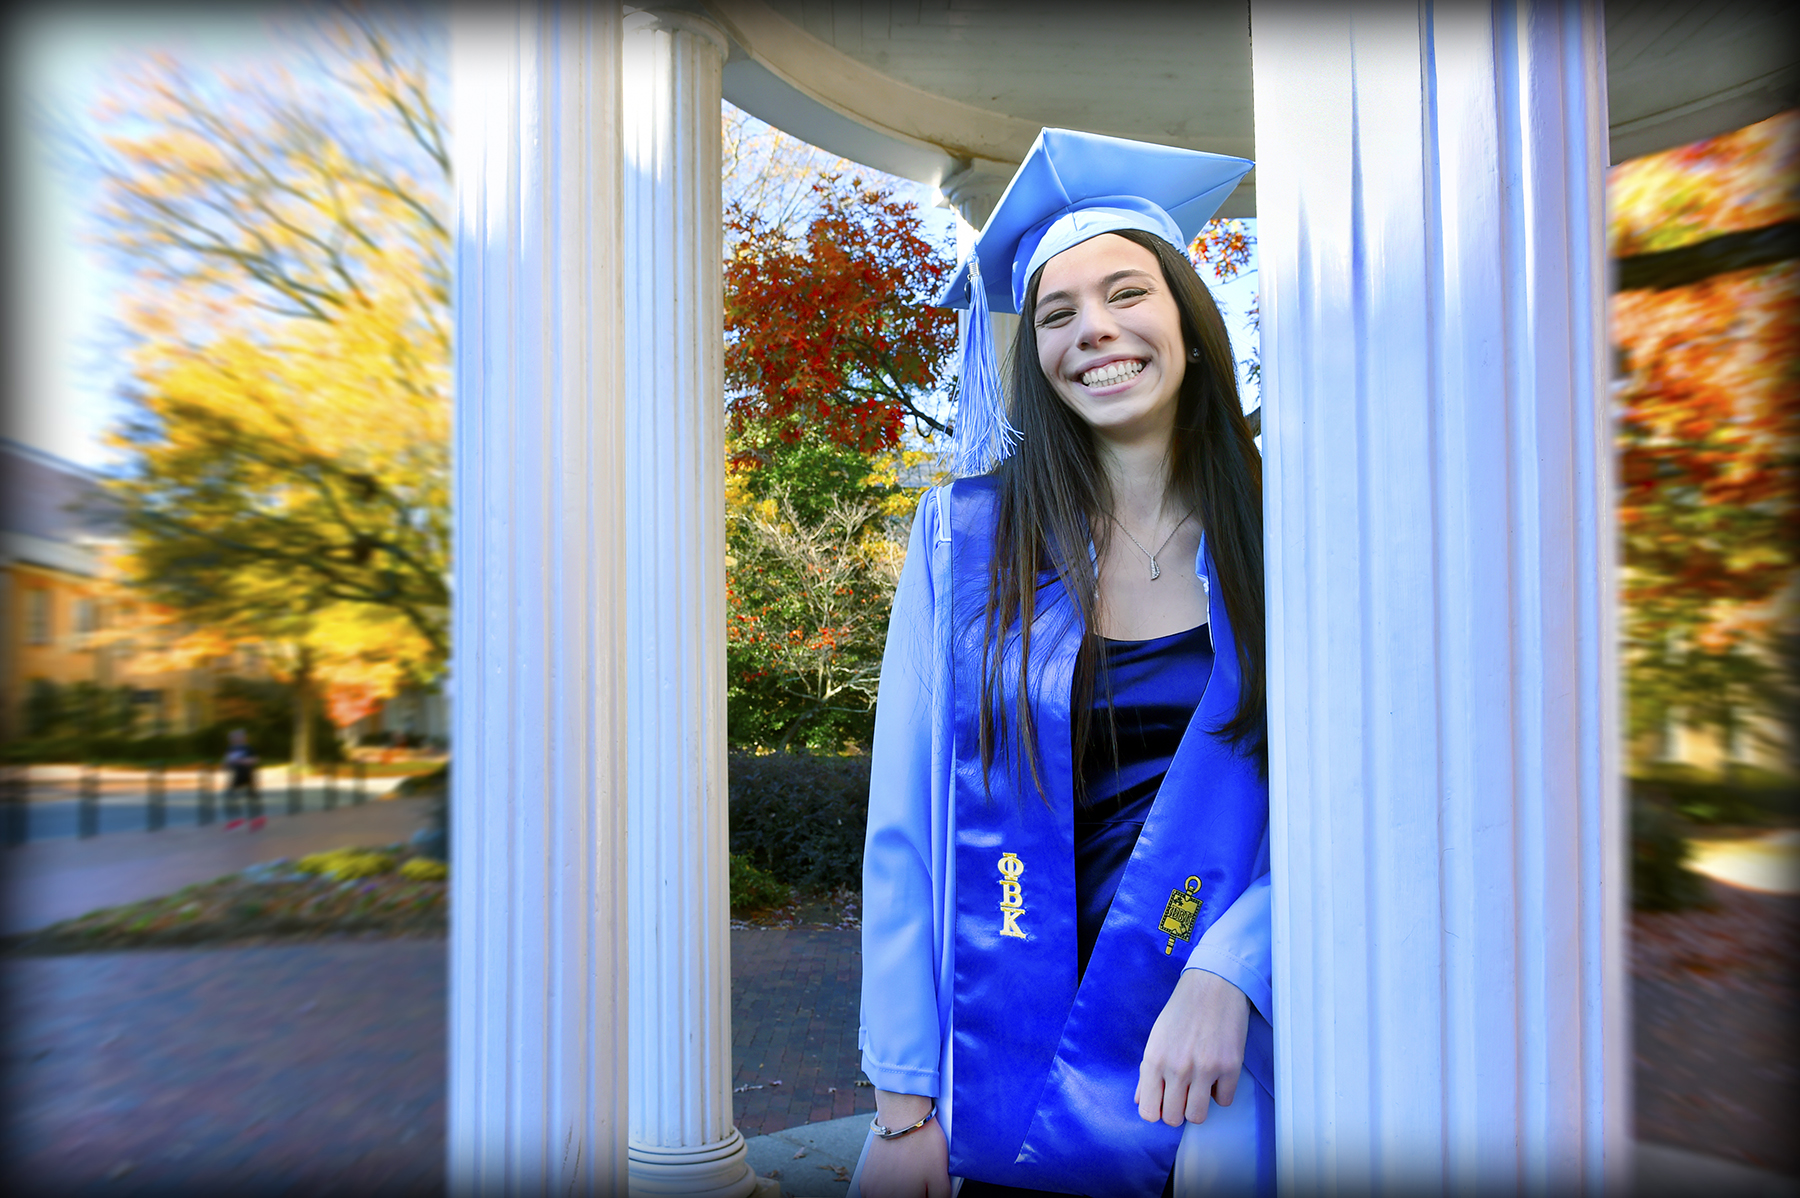 Maria Emilia Mazzolenis at the Old Well in her cap and gown.